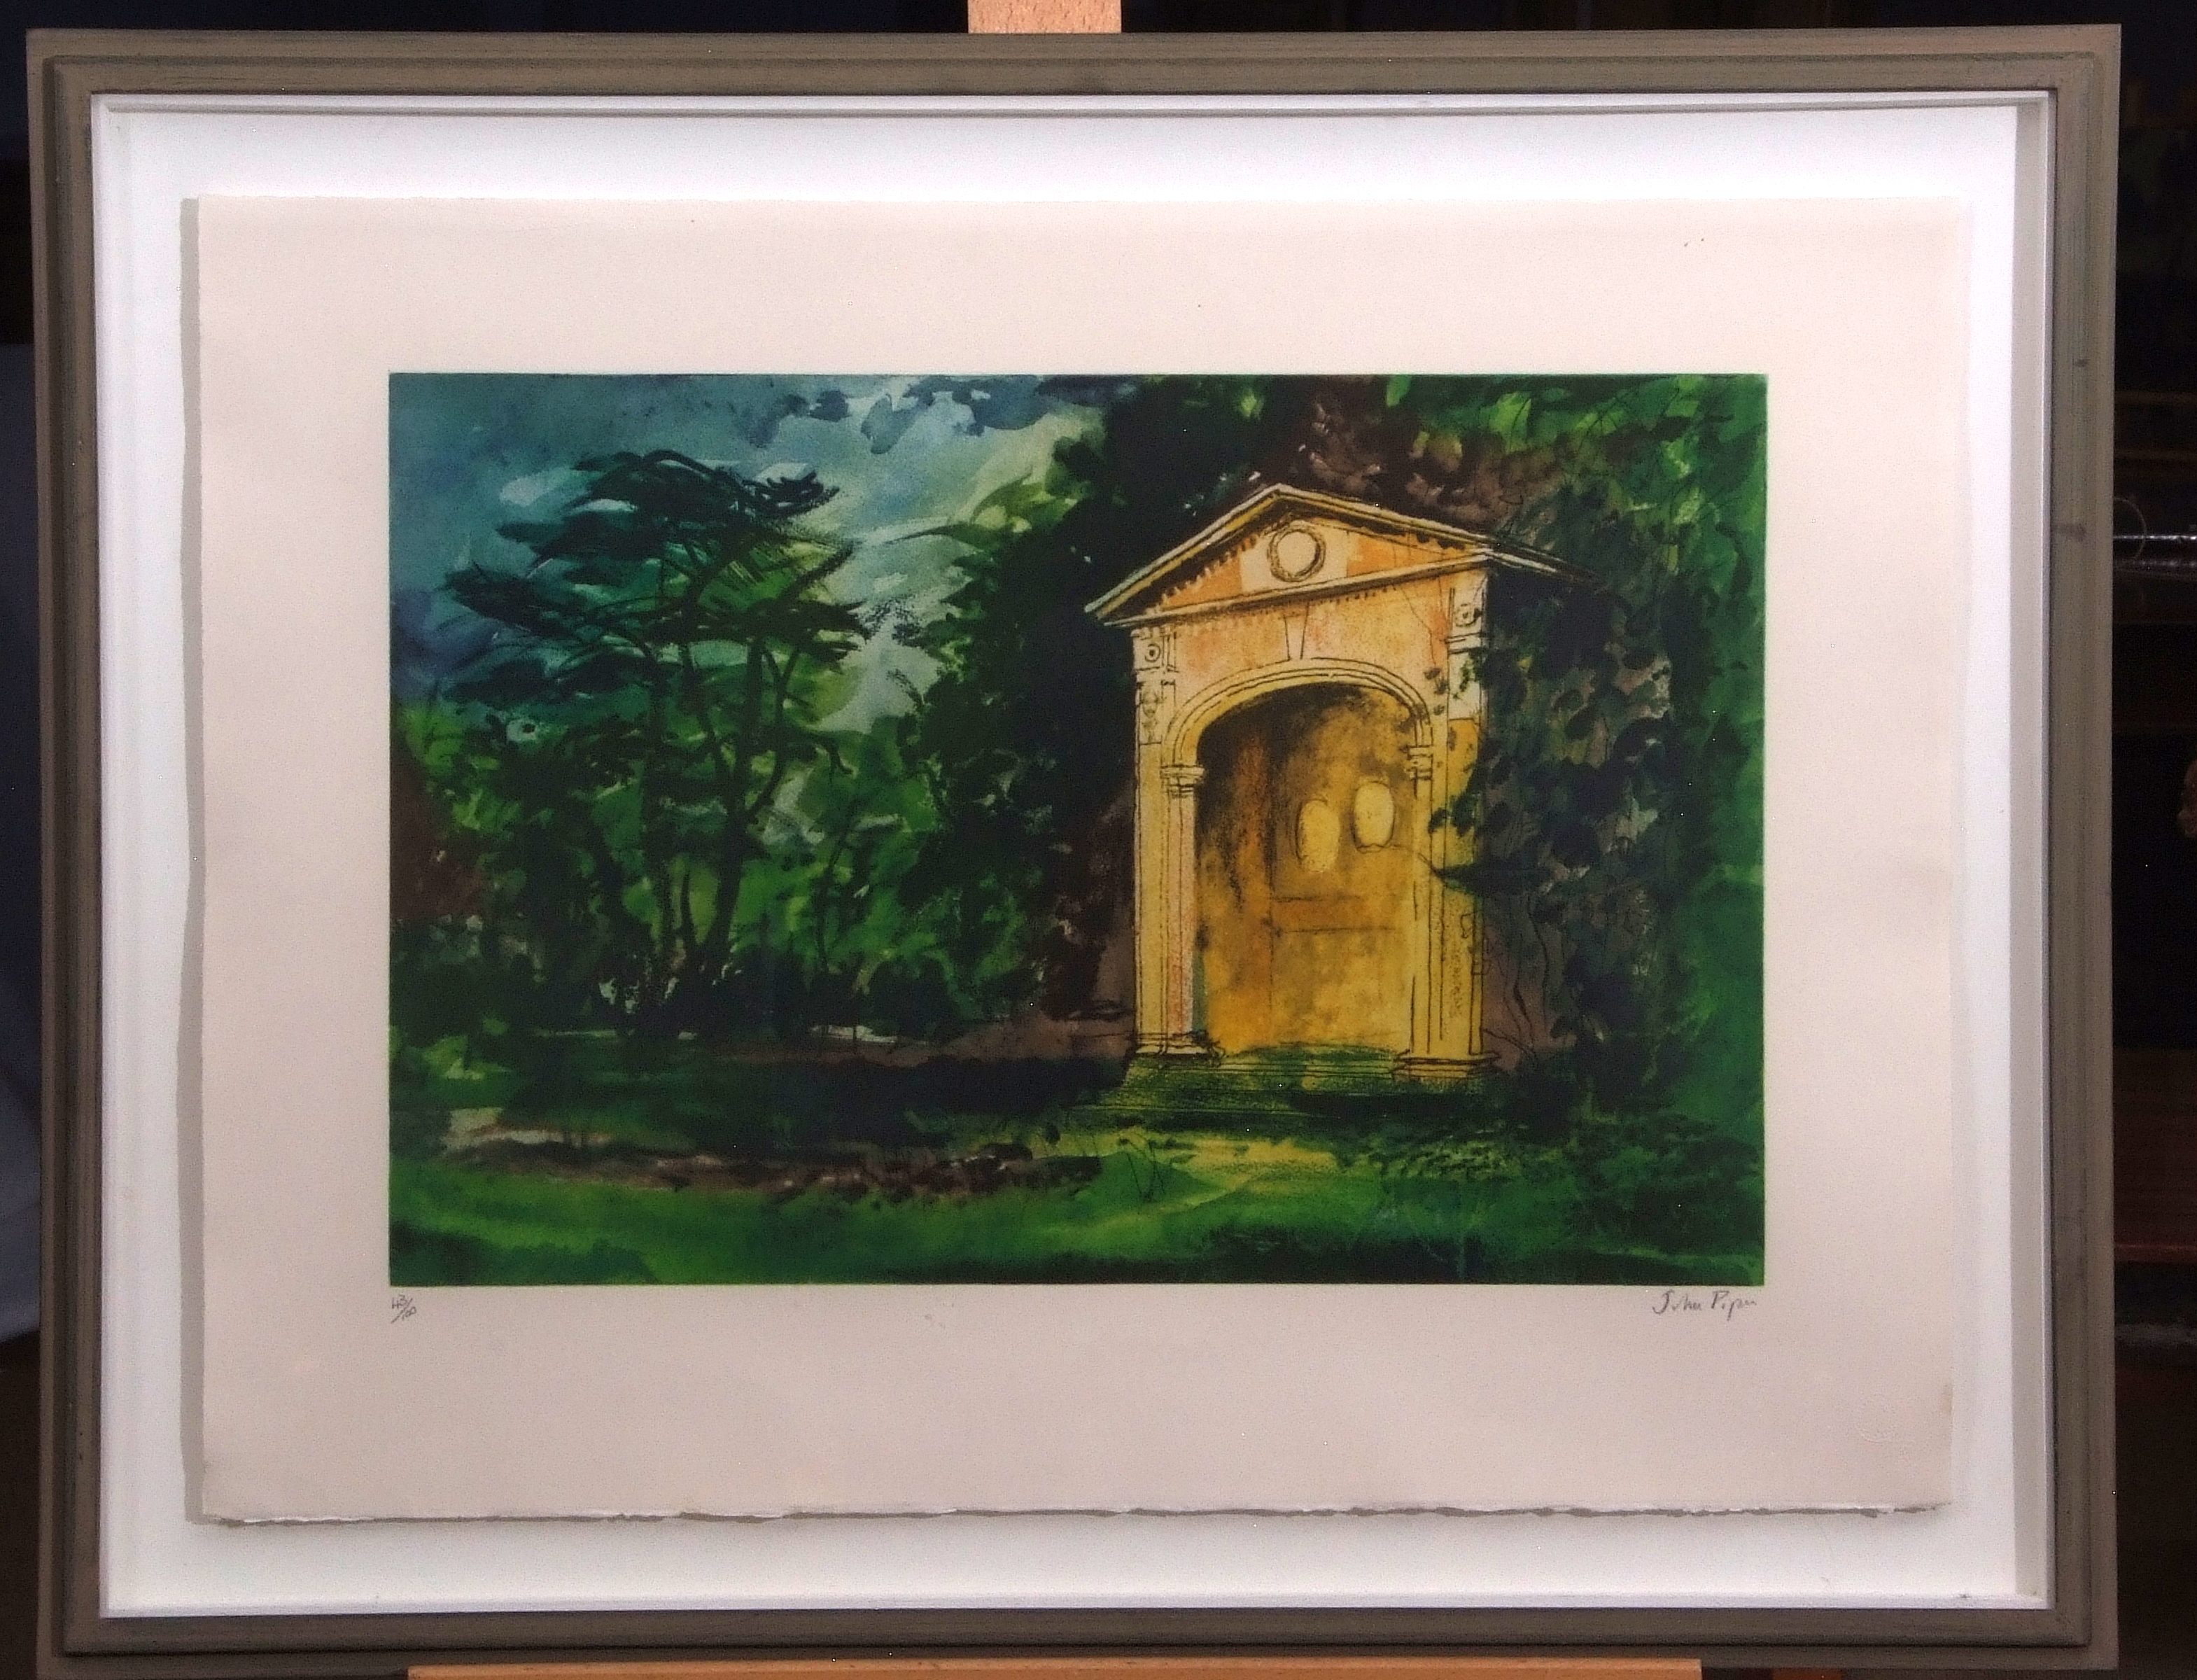 •AR John Piper, CH (1903-1992), "Temple at Stowe", lithograph, signed and numbered 43/100 in - Image 2 of 2